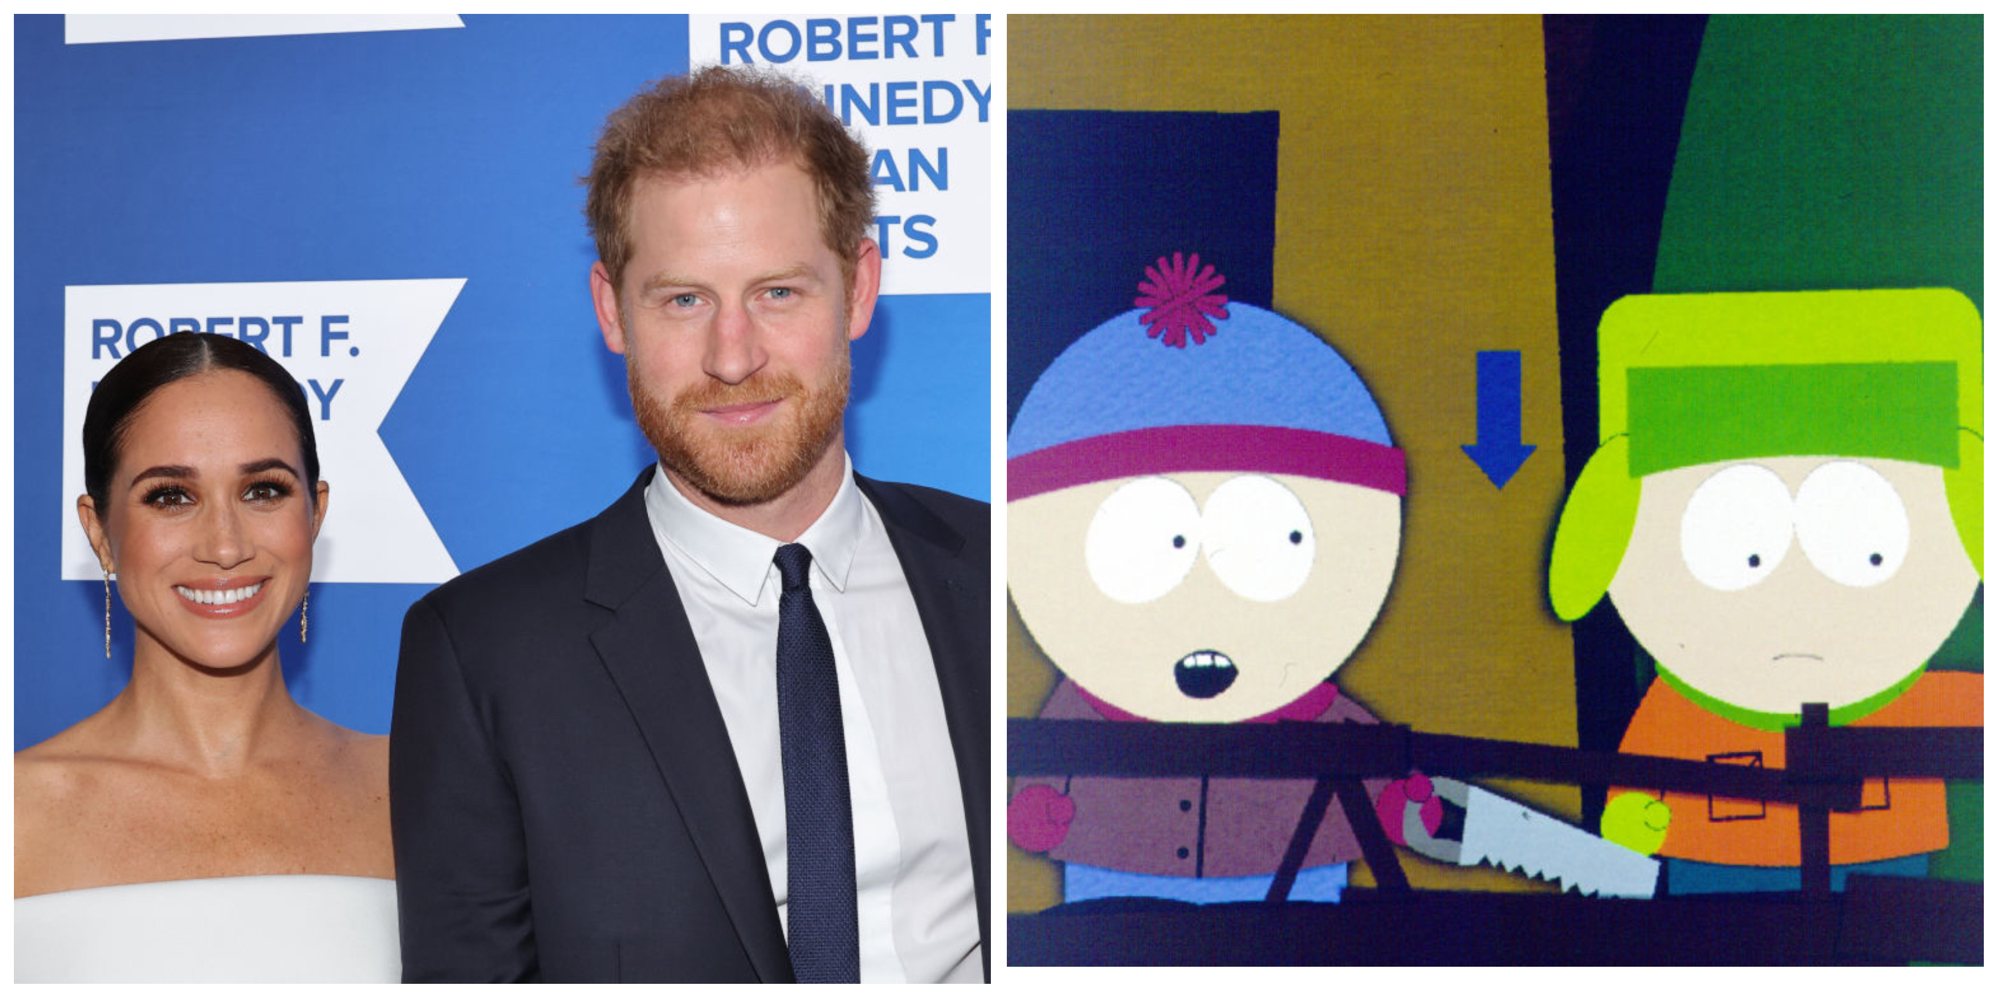 South Park versions of Harry and Meghan are roasted for oxymoronic  Worldwide Privacy Tour